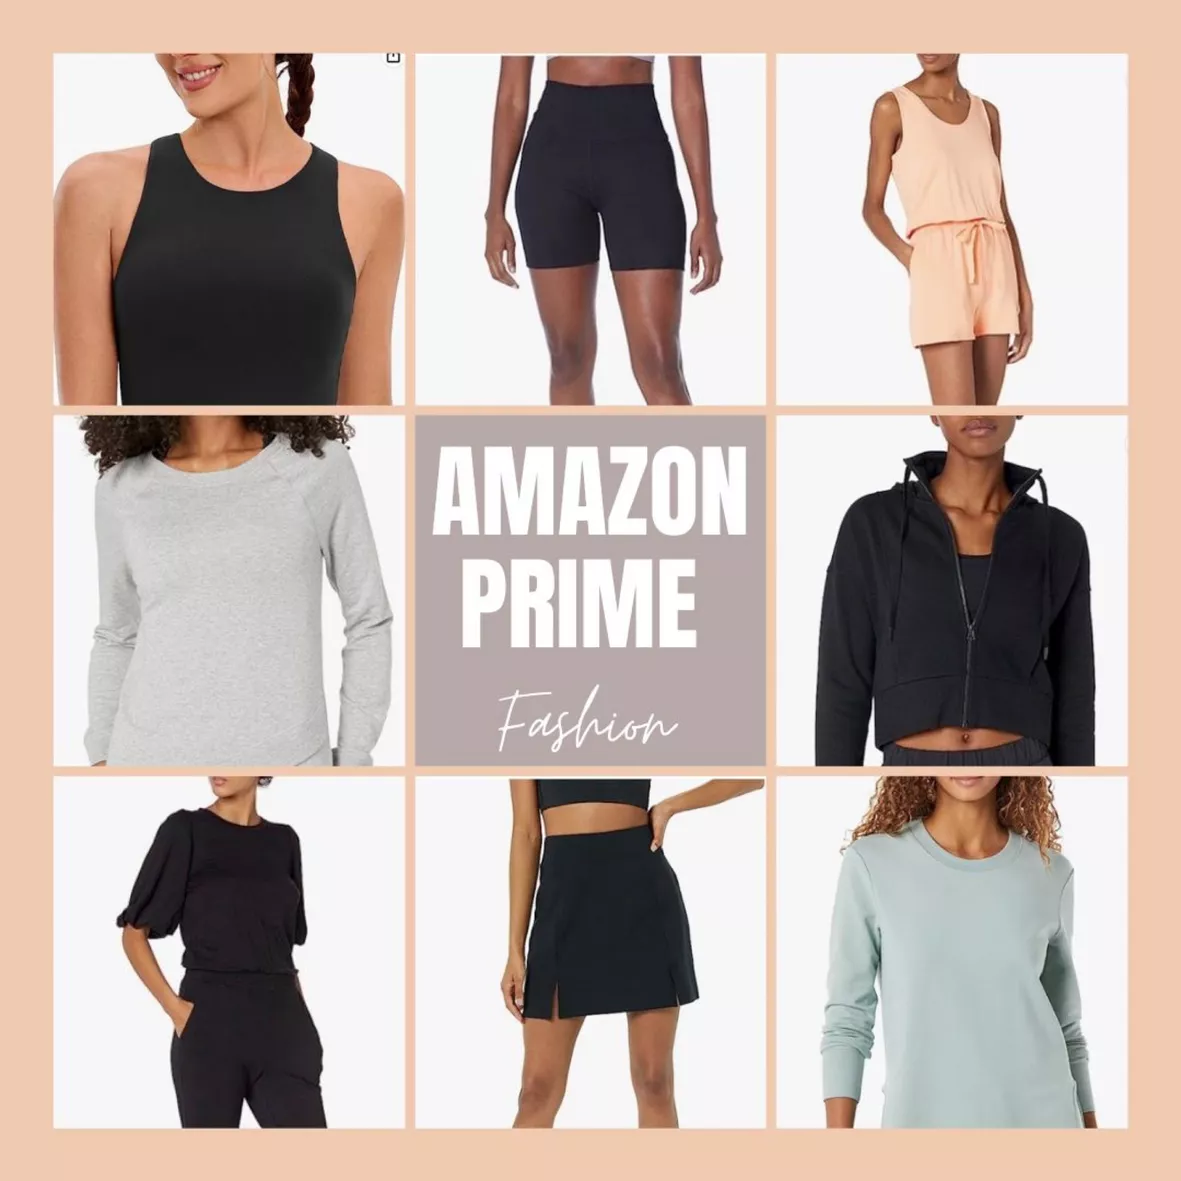 Crz Yoga Clothing Prime Day Deals going on NOW!!!